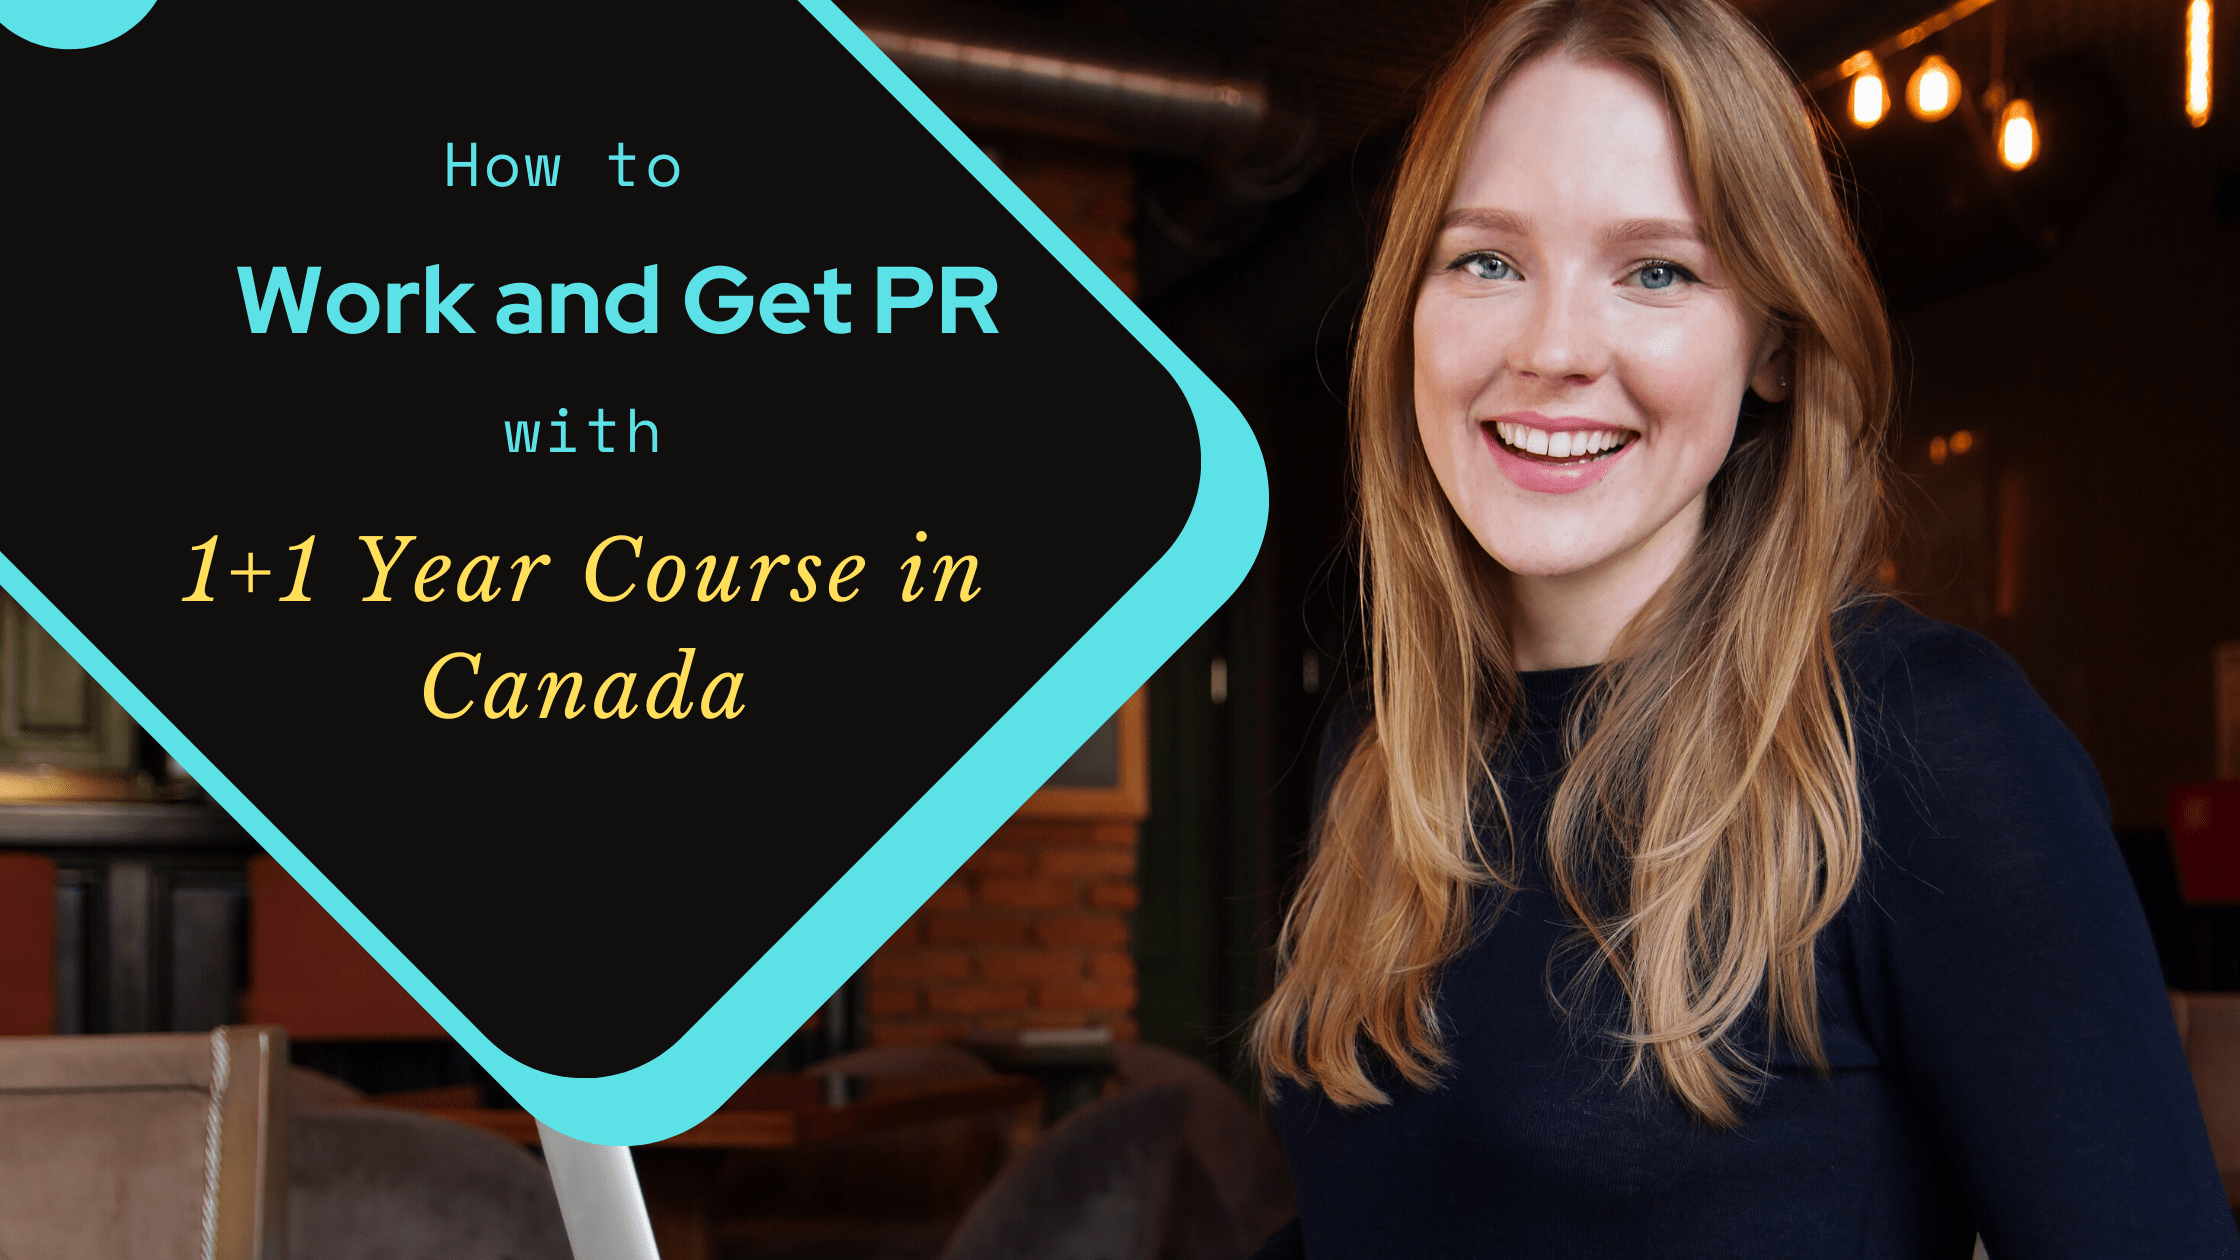 How to Work and Get PR with 1+1 Year Course in Canada